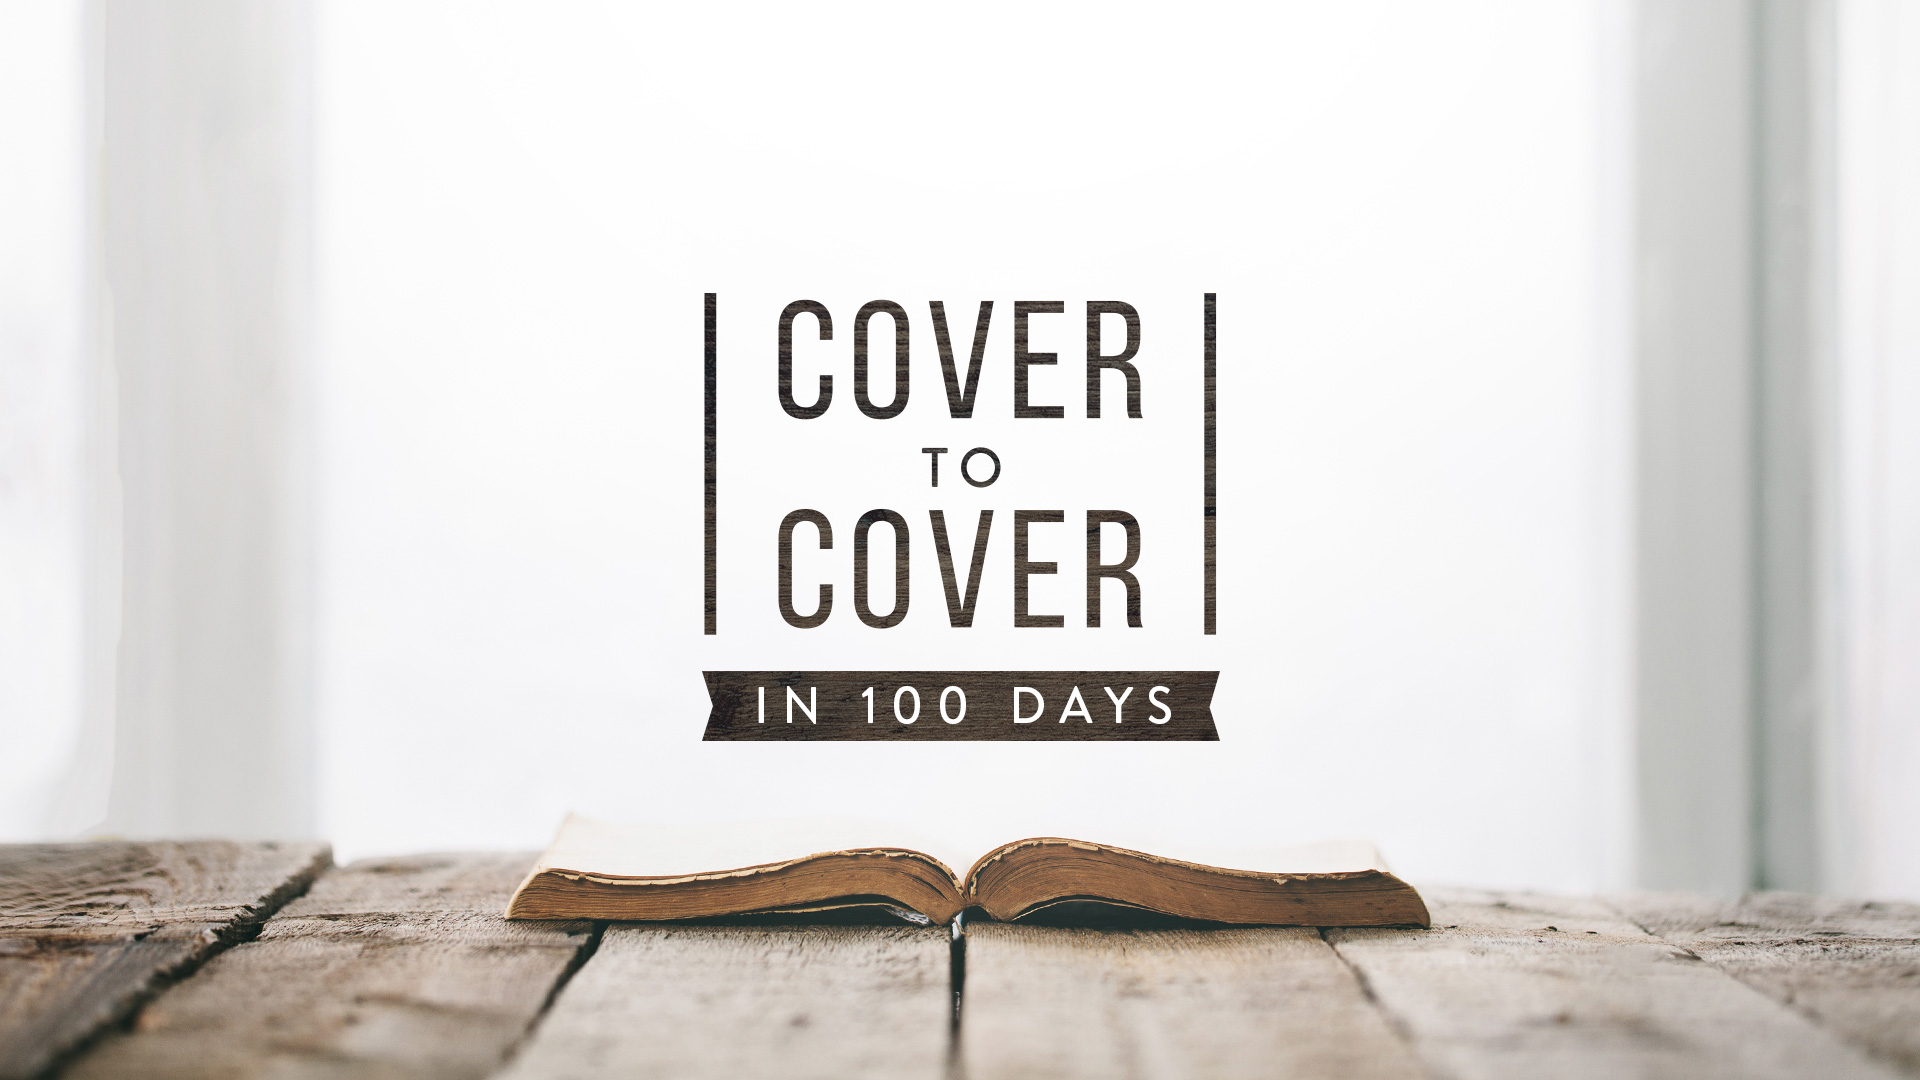 Are you ready to embark on a spectacular journey? Have you ever wanted to read the Bible from beginning to end? Have you been longing to anchor yourself in God’s promises in the midst of this season of turmoil in our world? Join us as we read the Bible from cover to cover in 100 days.
